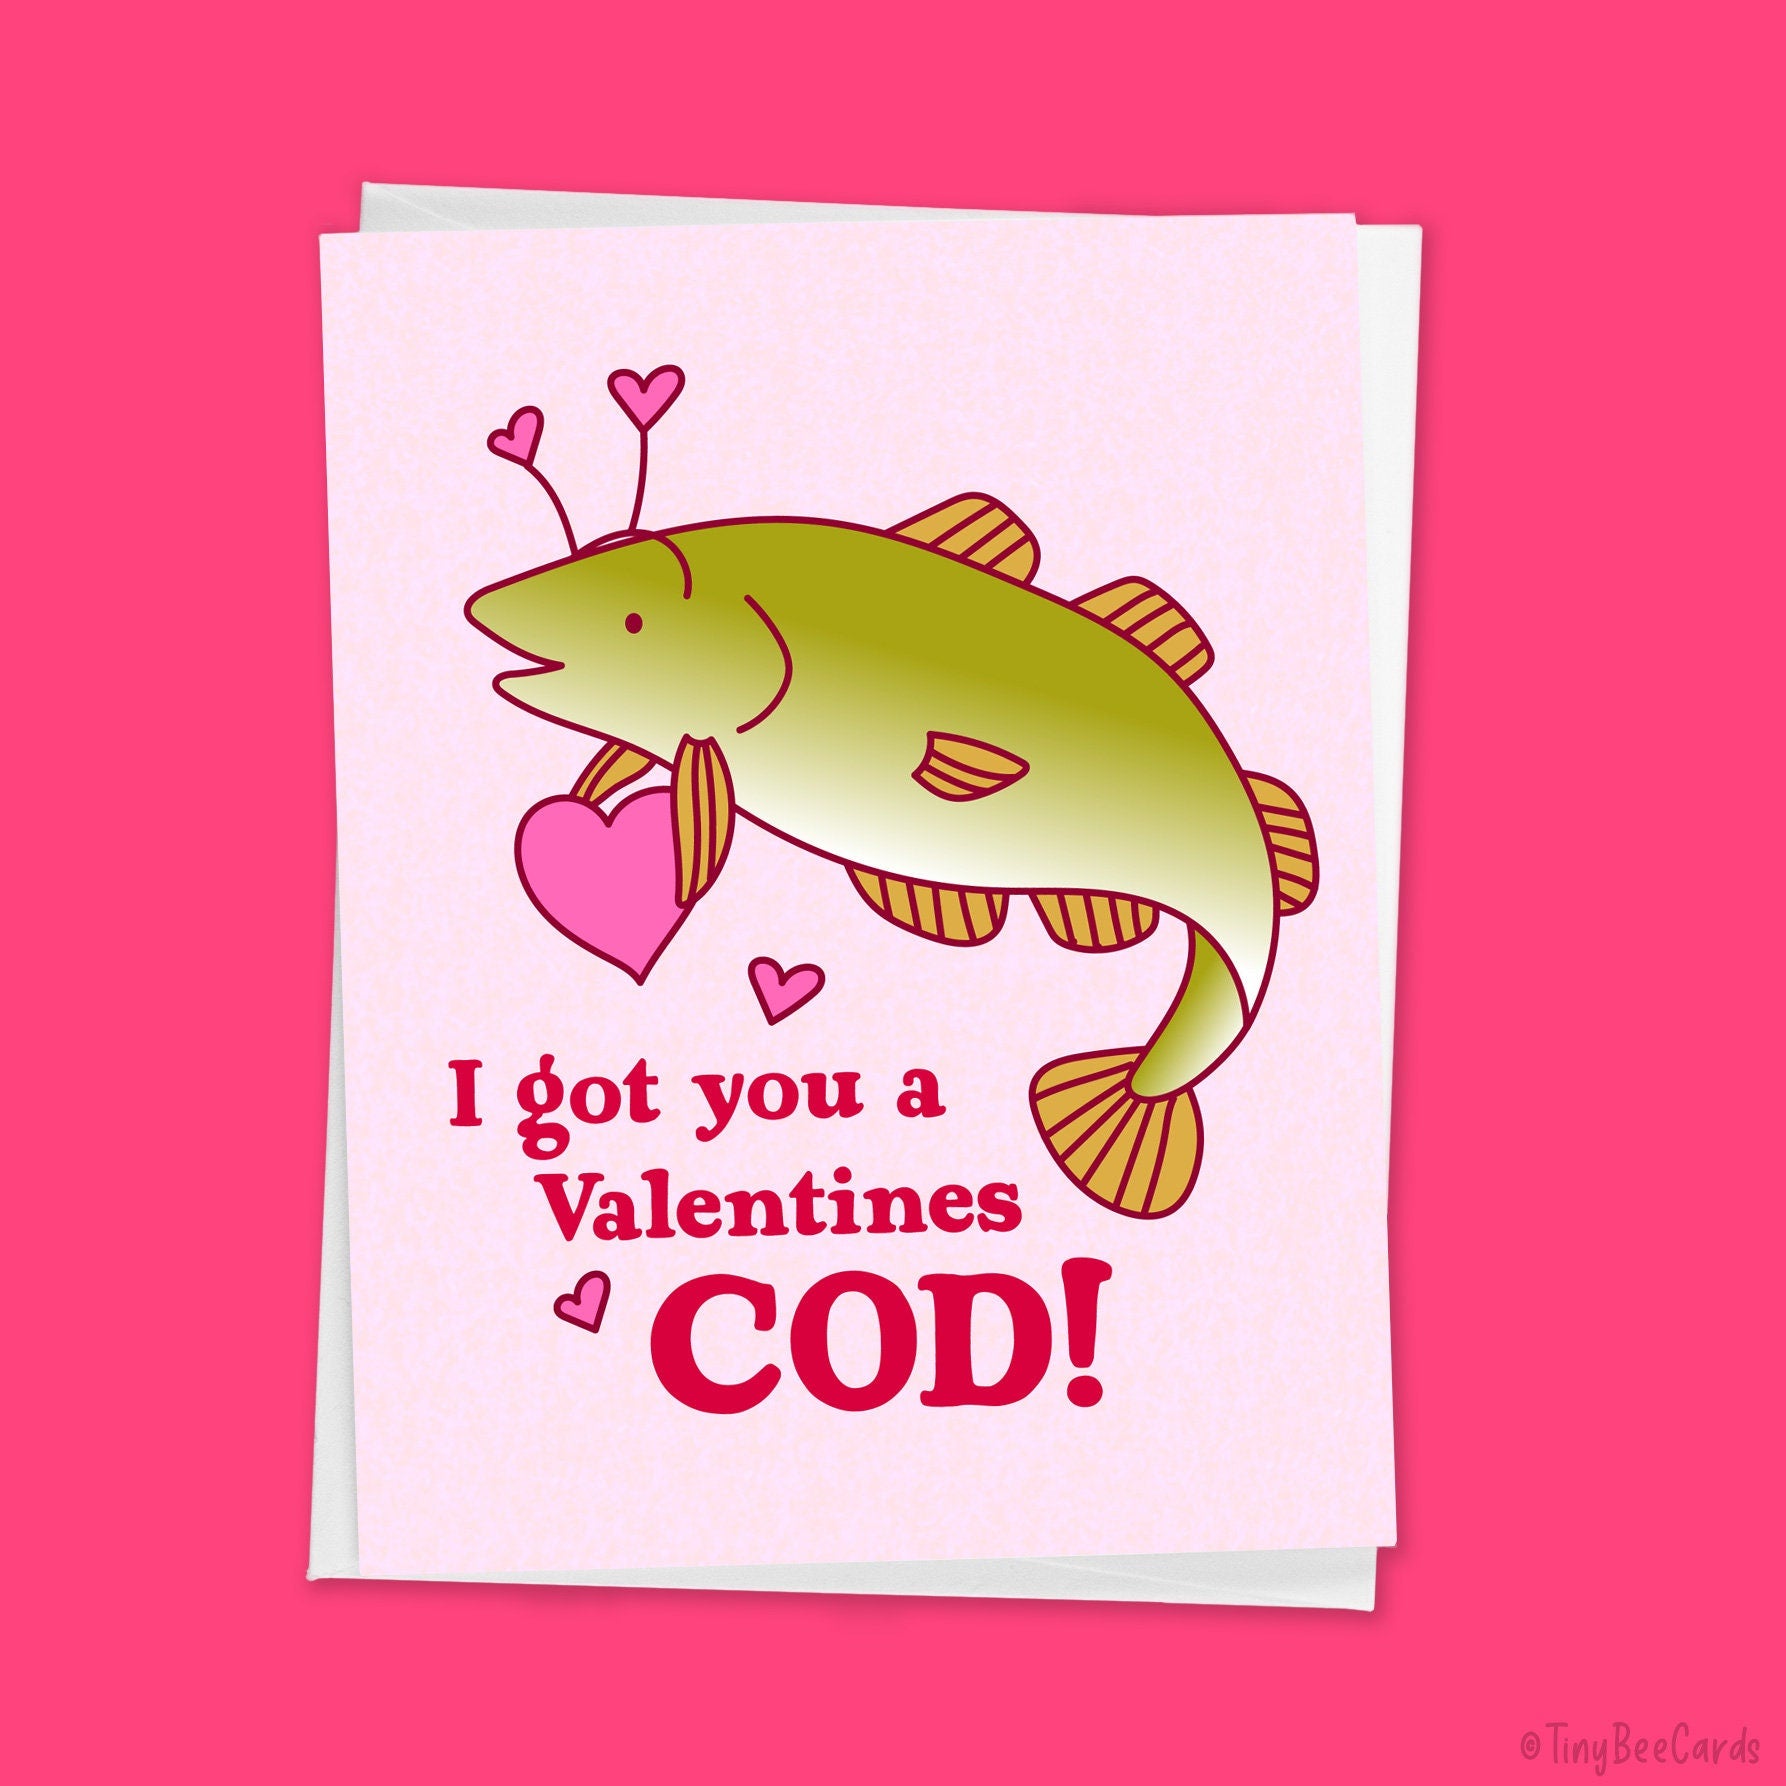 Fishing Valentine's Day Cards